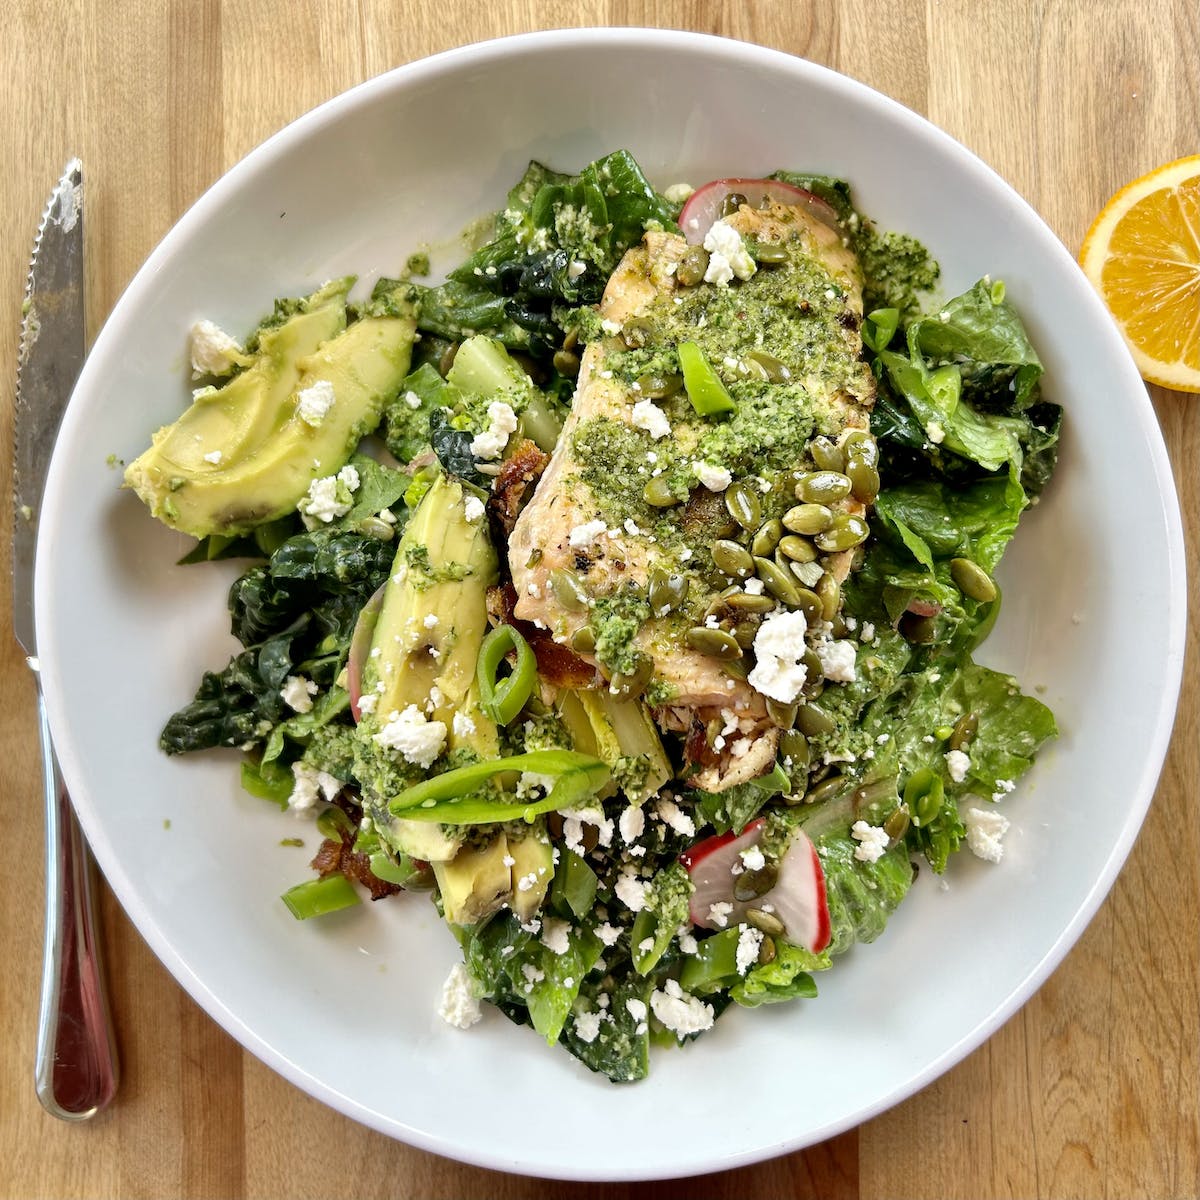 white bowl filled with greens, salmon, avocado, and a green sauce